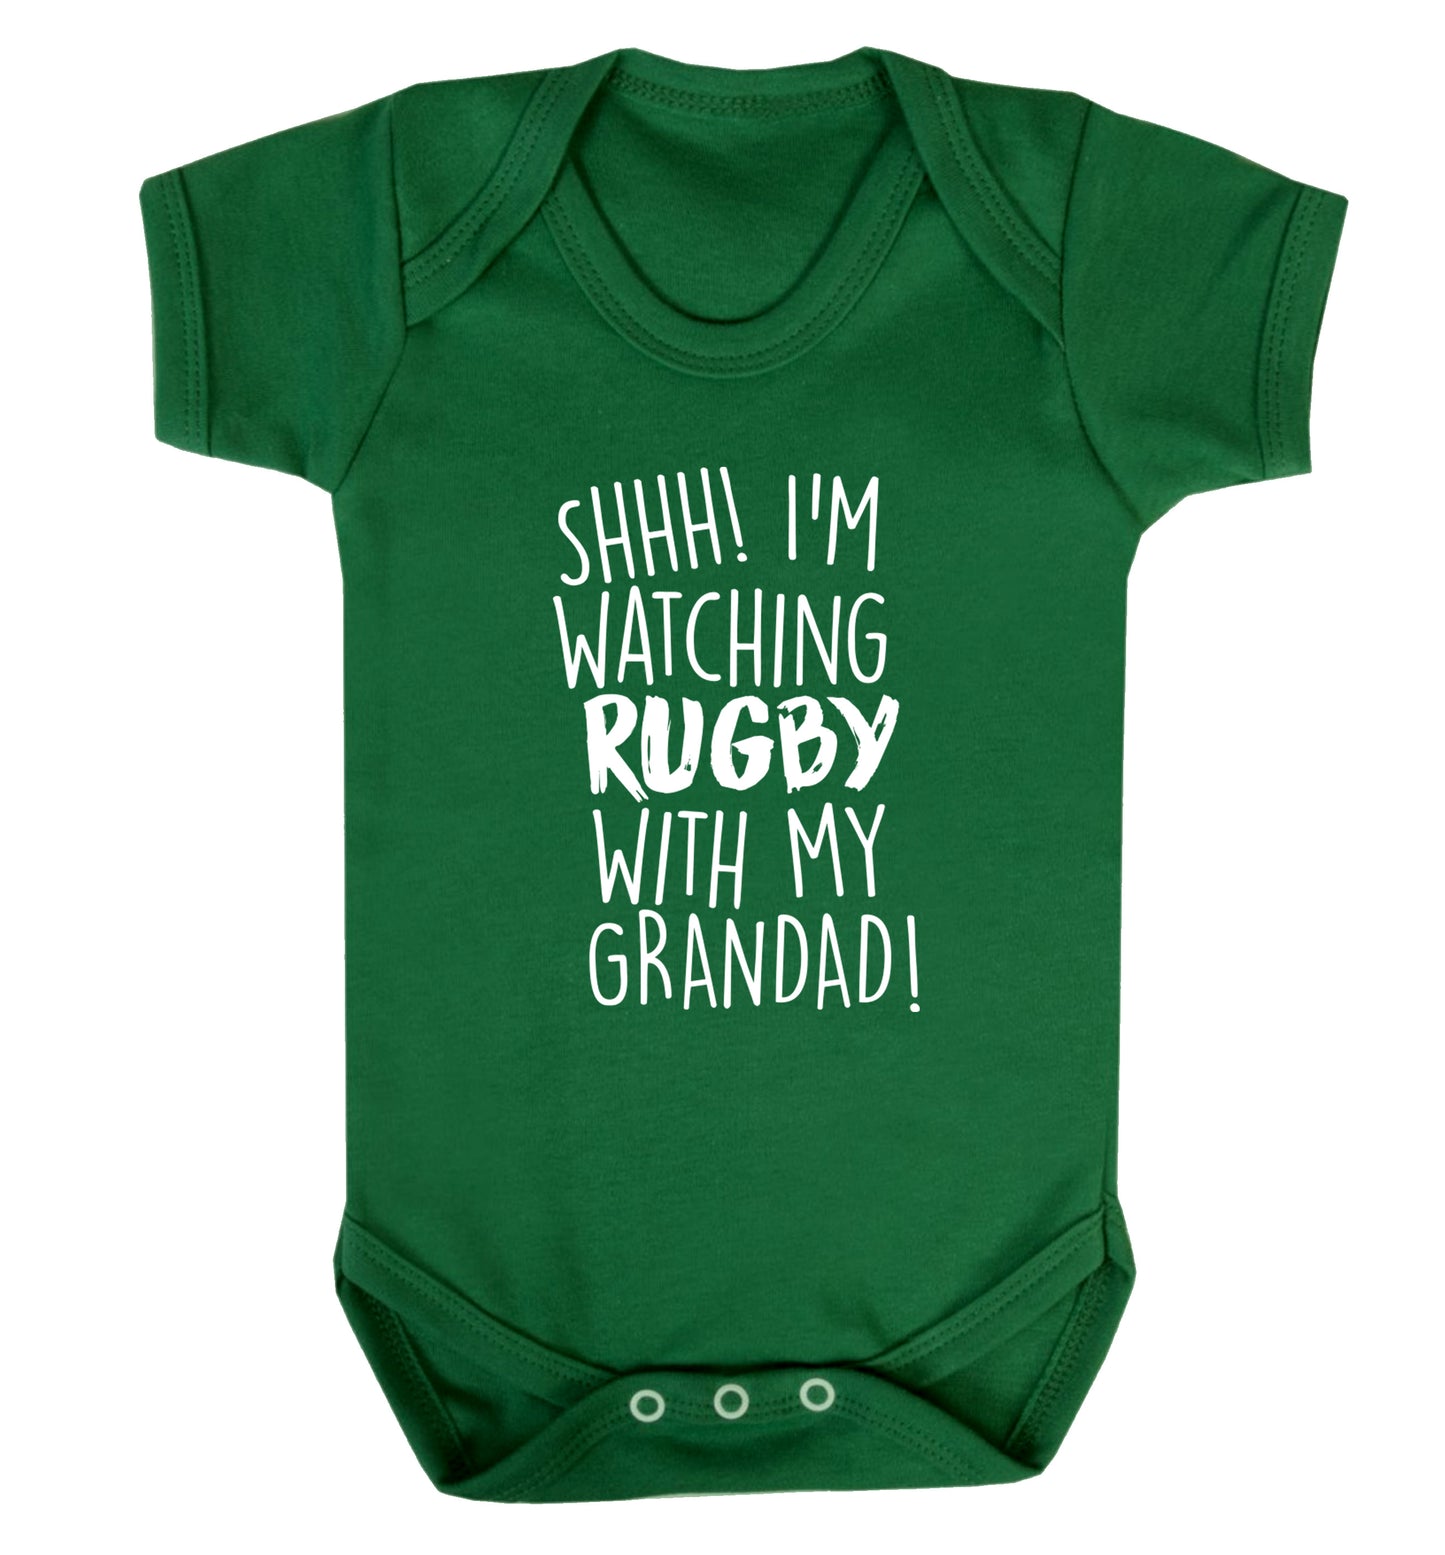 Shh I'm watching rugby with my grandad Baby Vest green 18-24 months